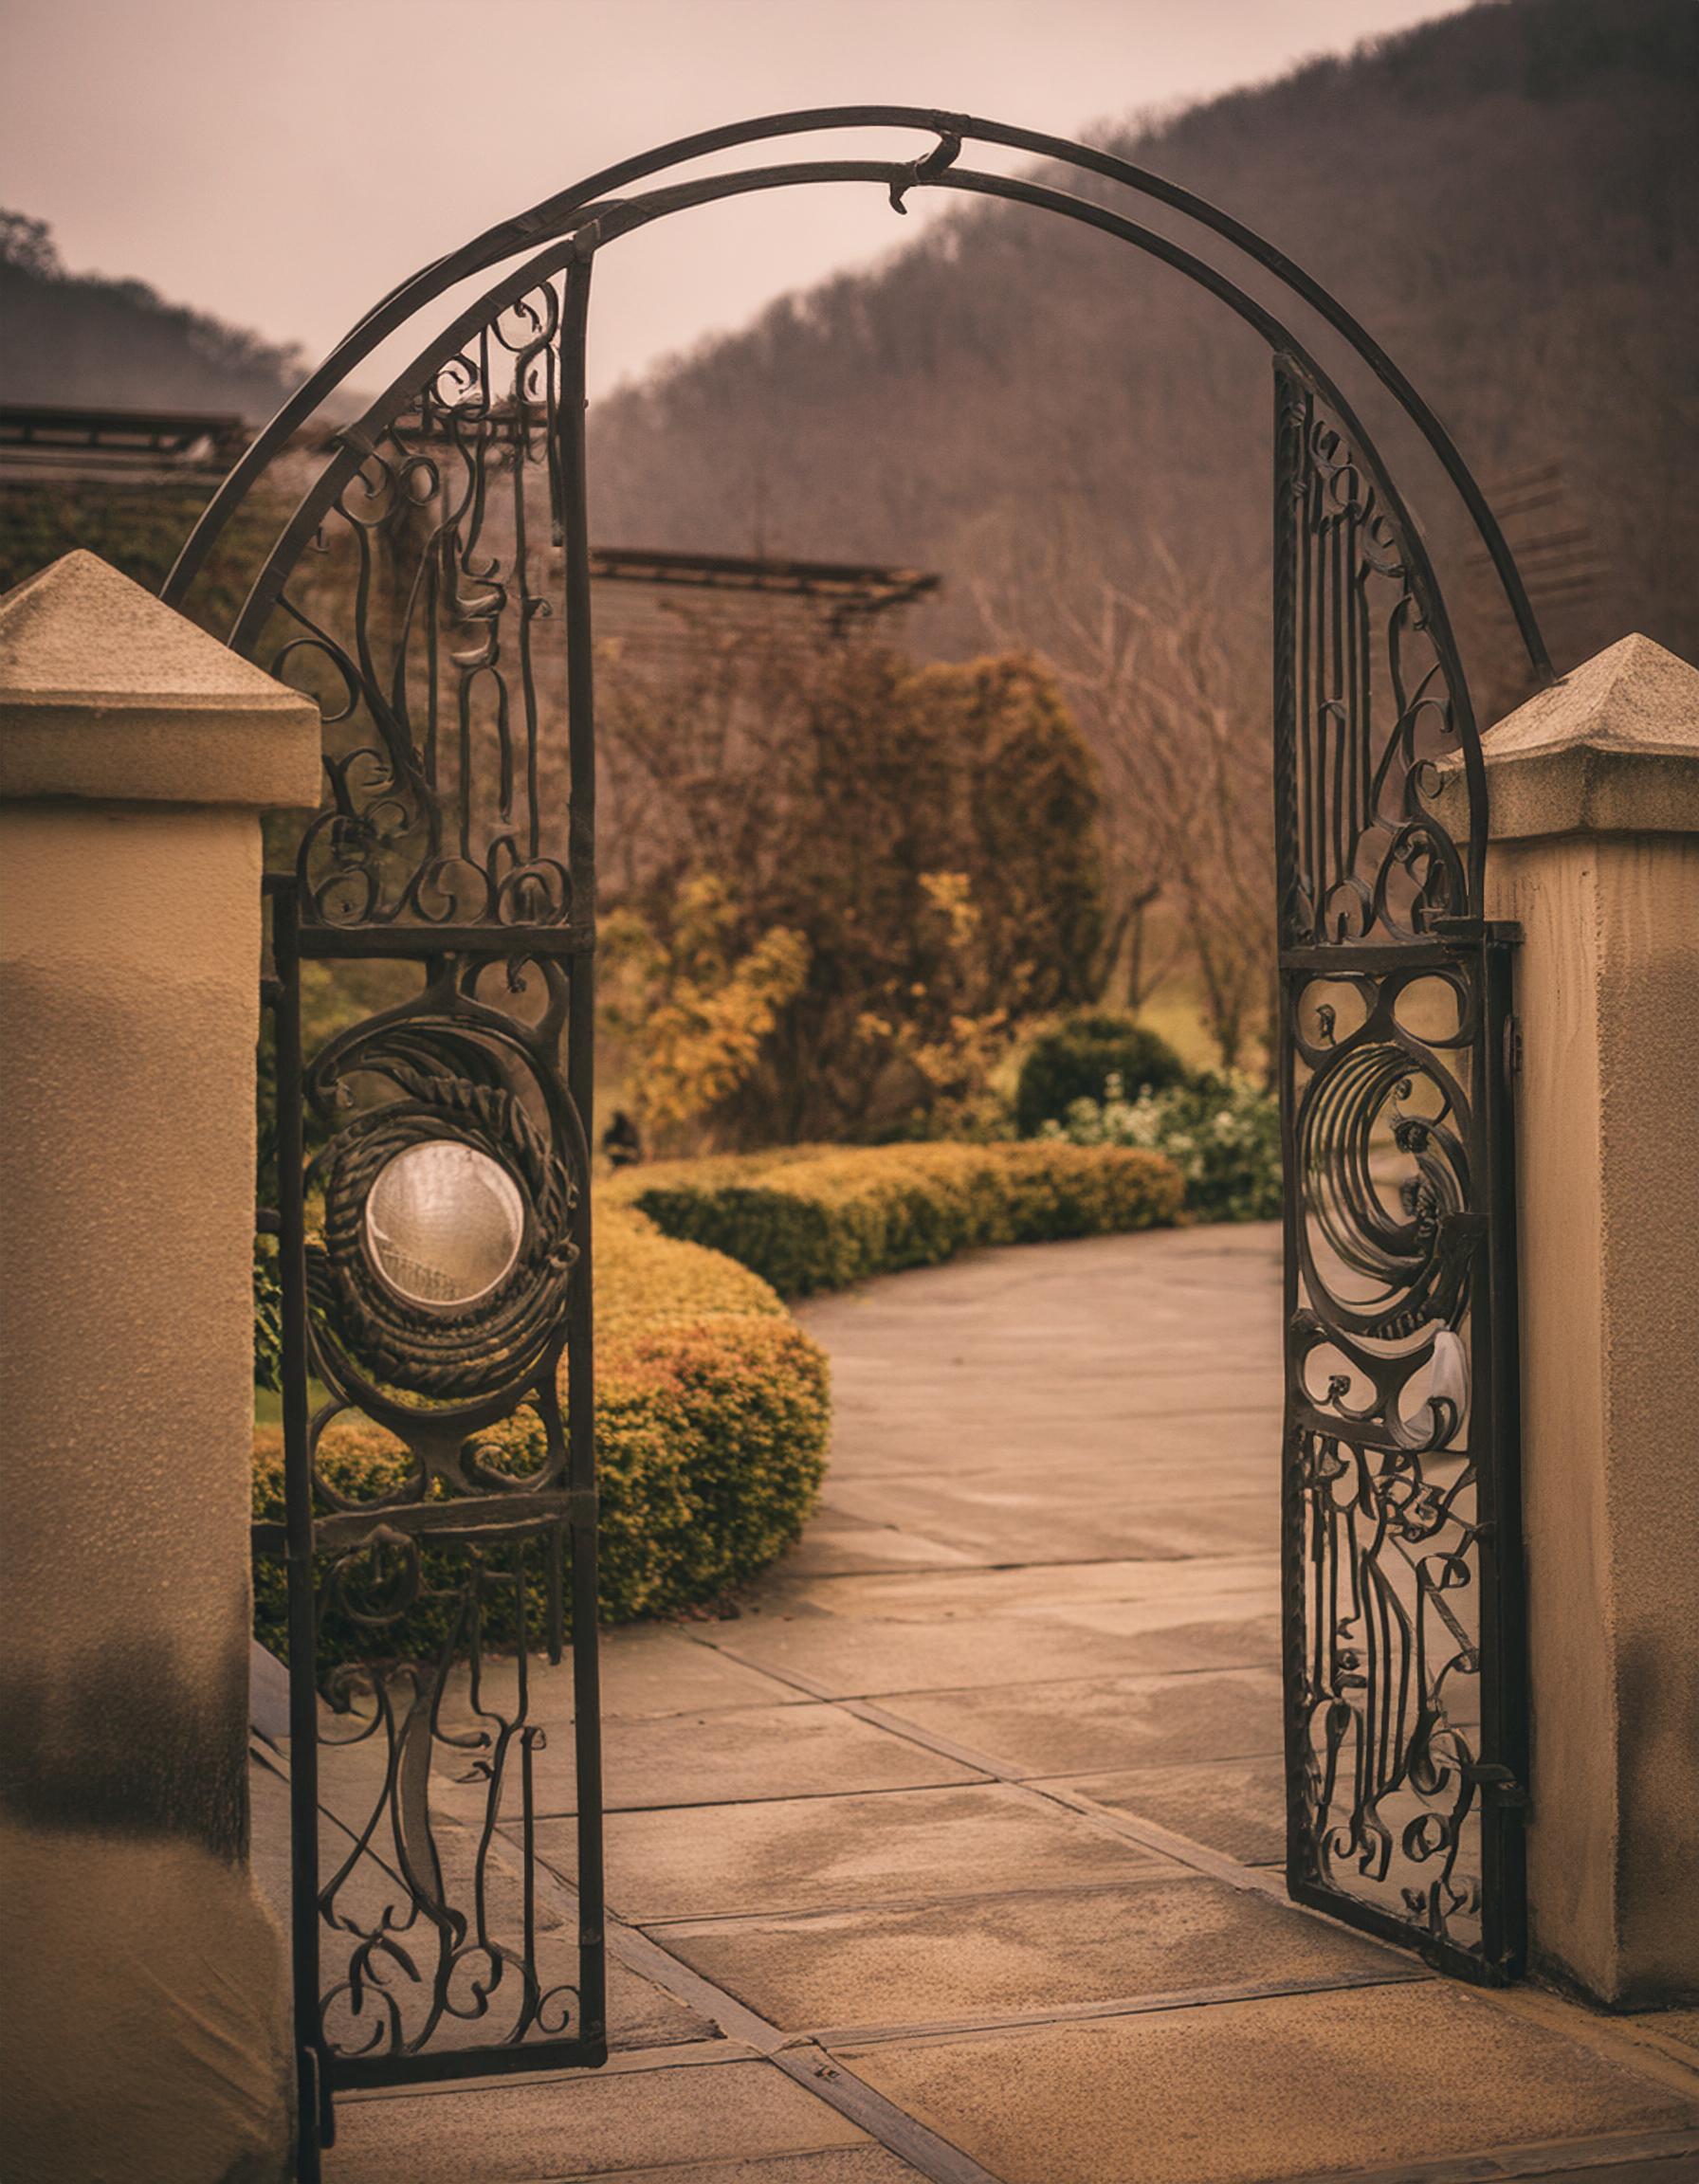 Firefly Create an outdoor scene showcasing custom iron gates, fences, and a firepit by Appalachian I(6)